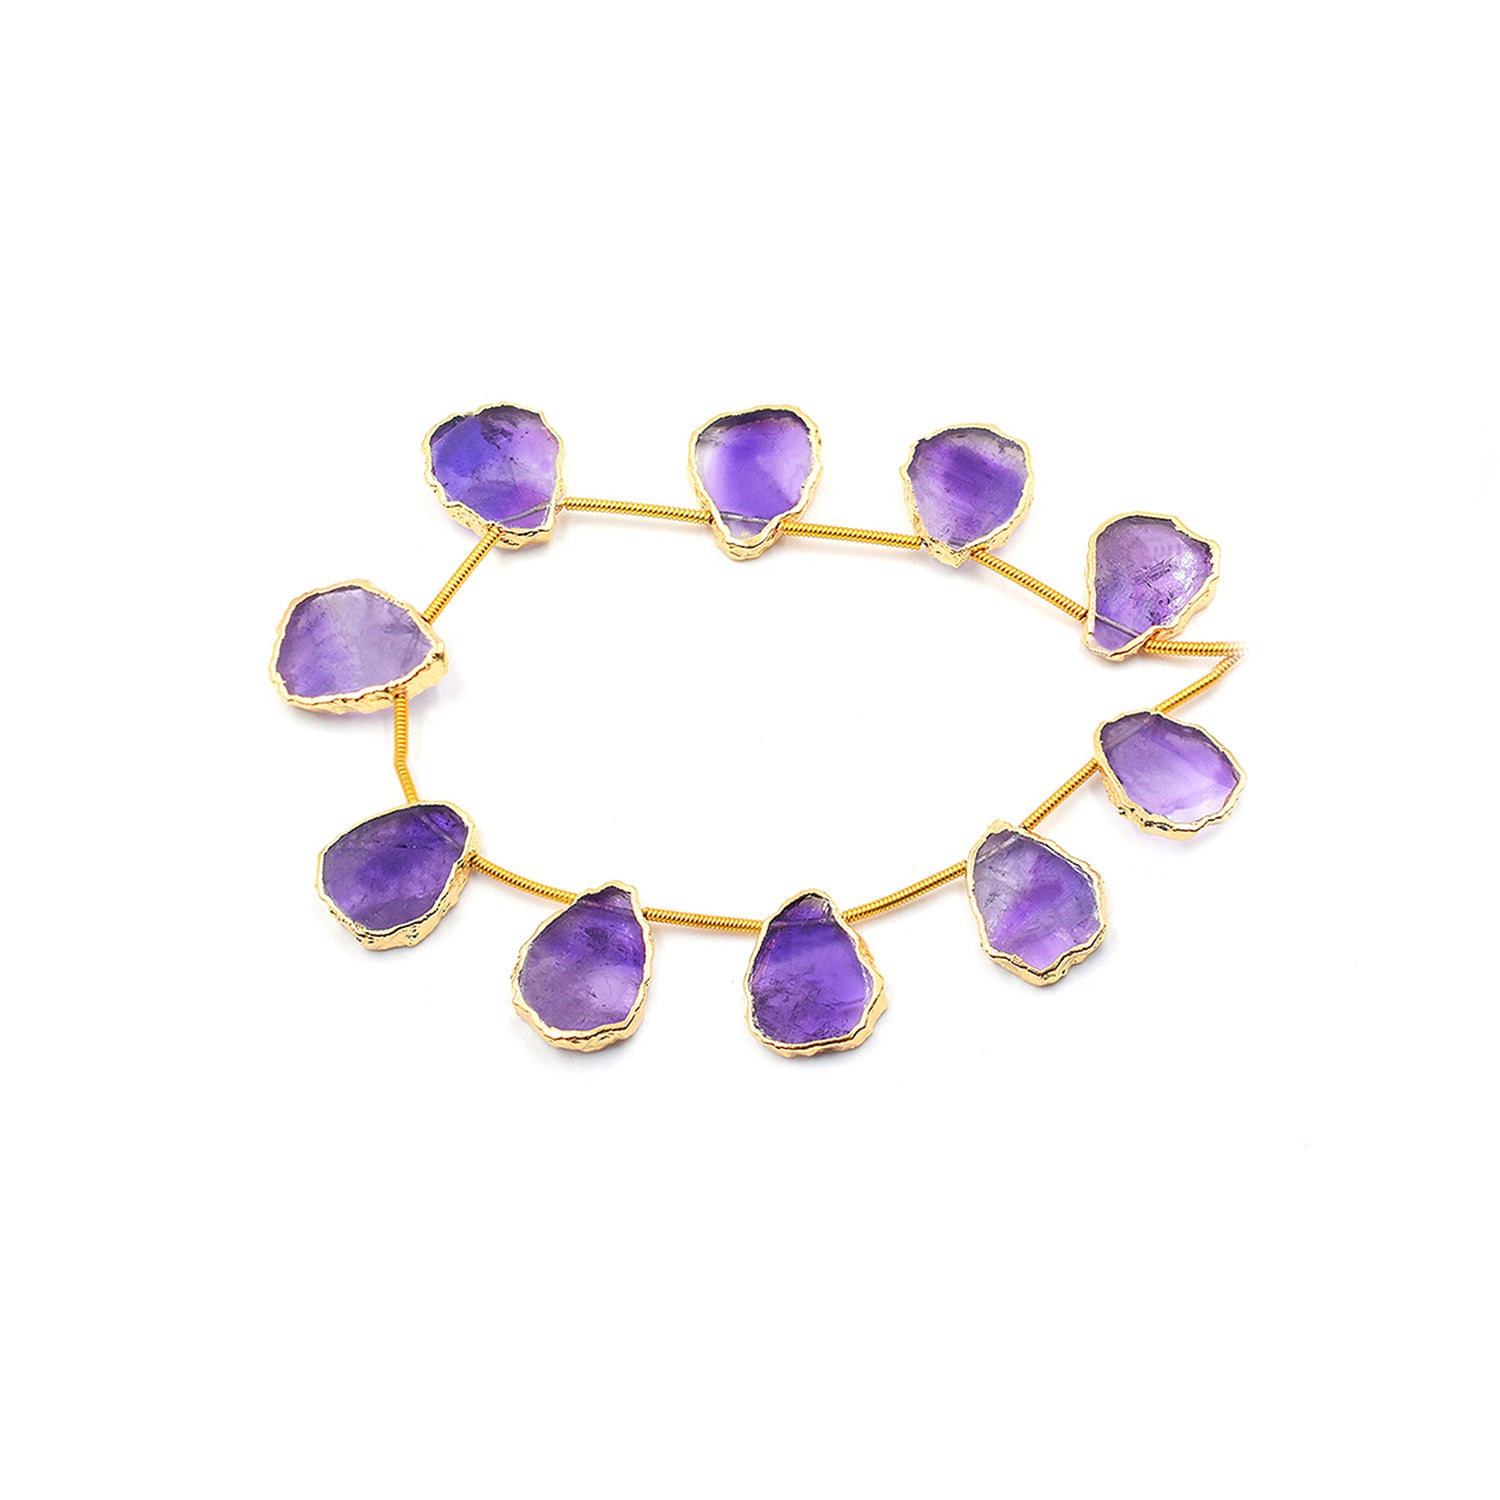 Amethyst 15X11 MM Uneven Shape Side Drilled Gold Electroplated Strand